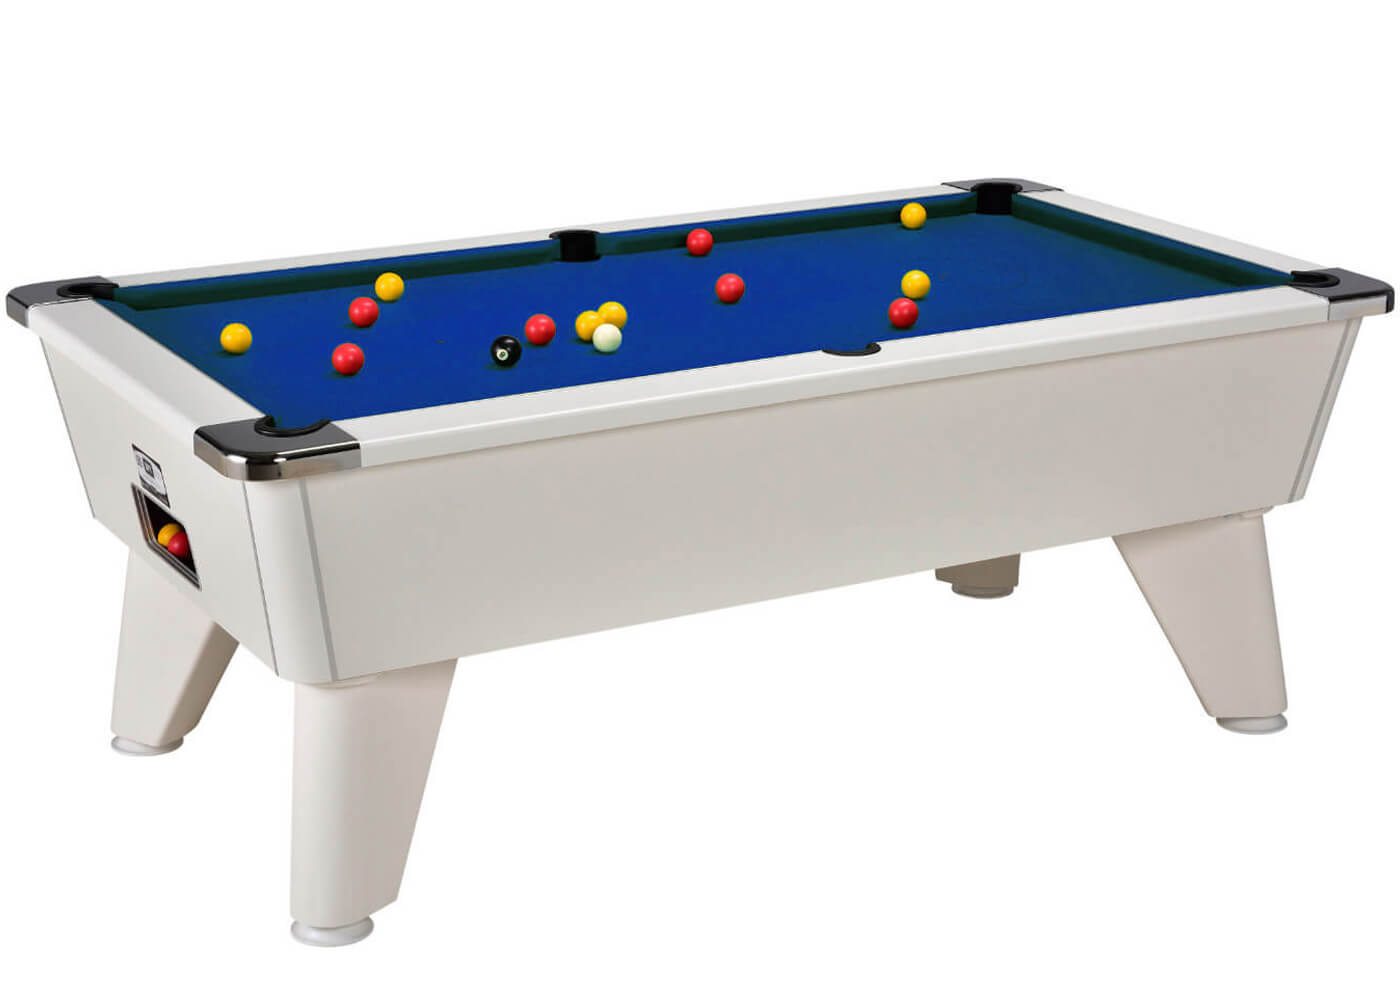 Outback 2.0 Outdoor Pool Table